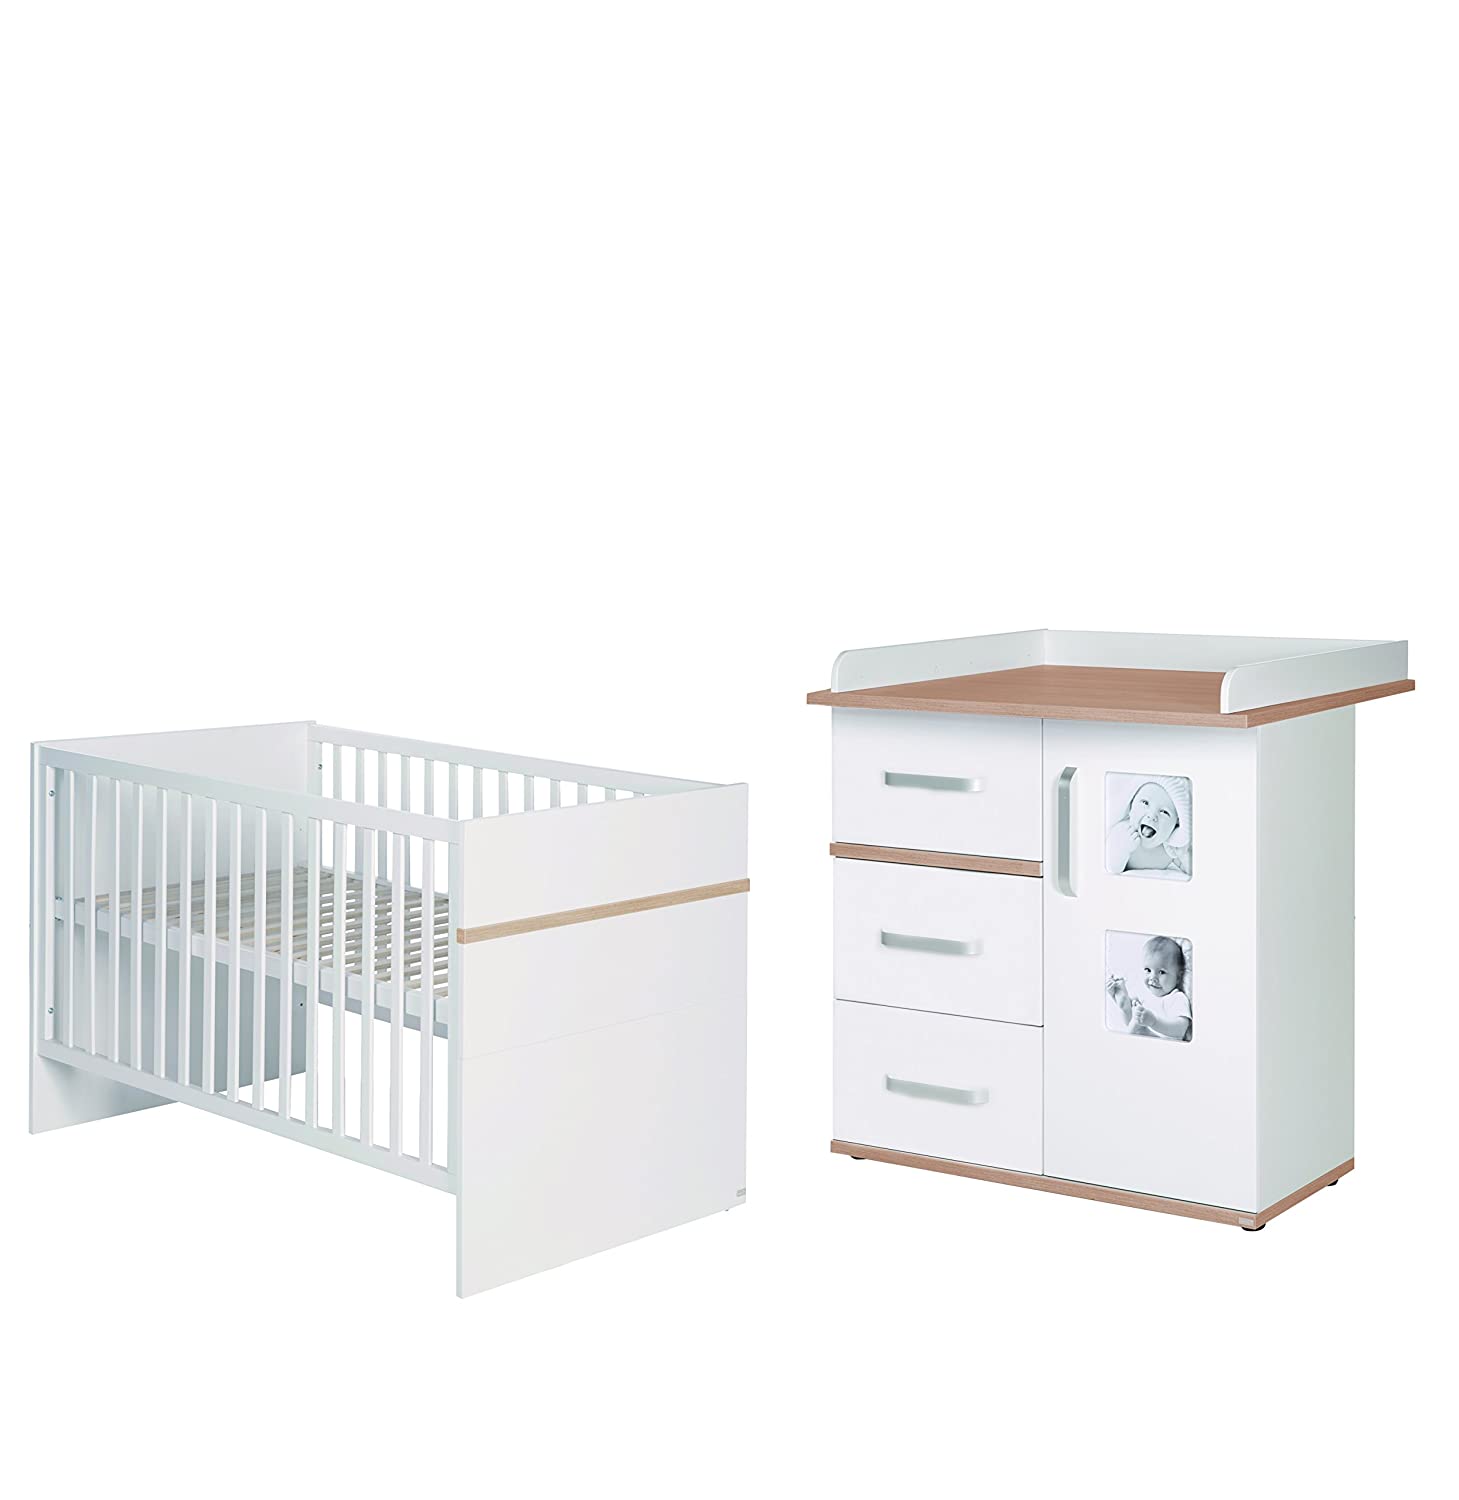 roba Pia 60991-60971 Bed Changing Unit Combination Set Consisting of Combi Cot and Narrow Changing Table